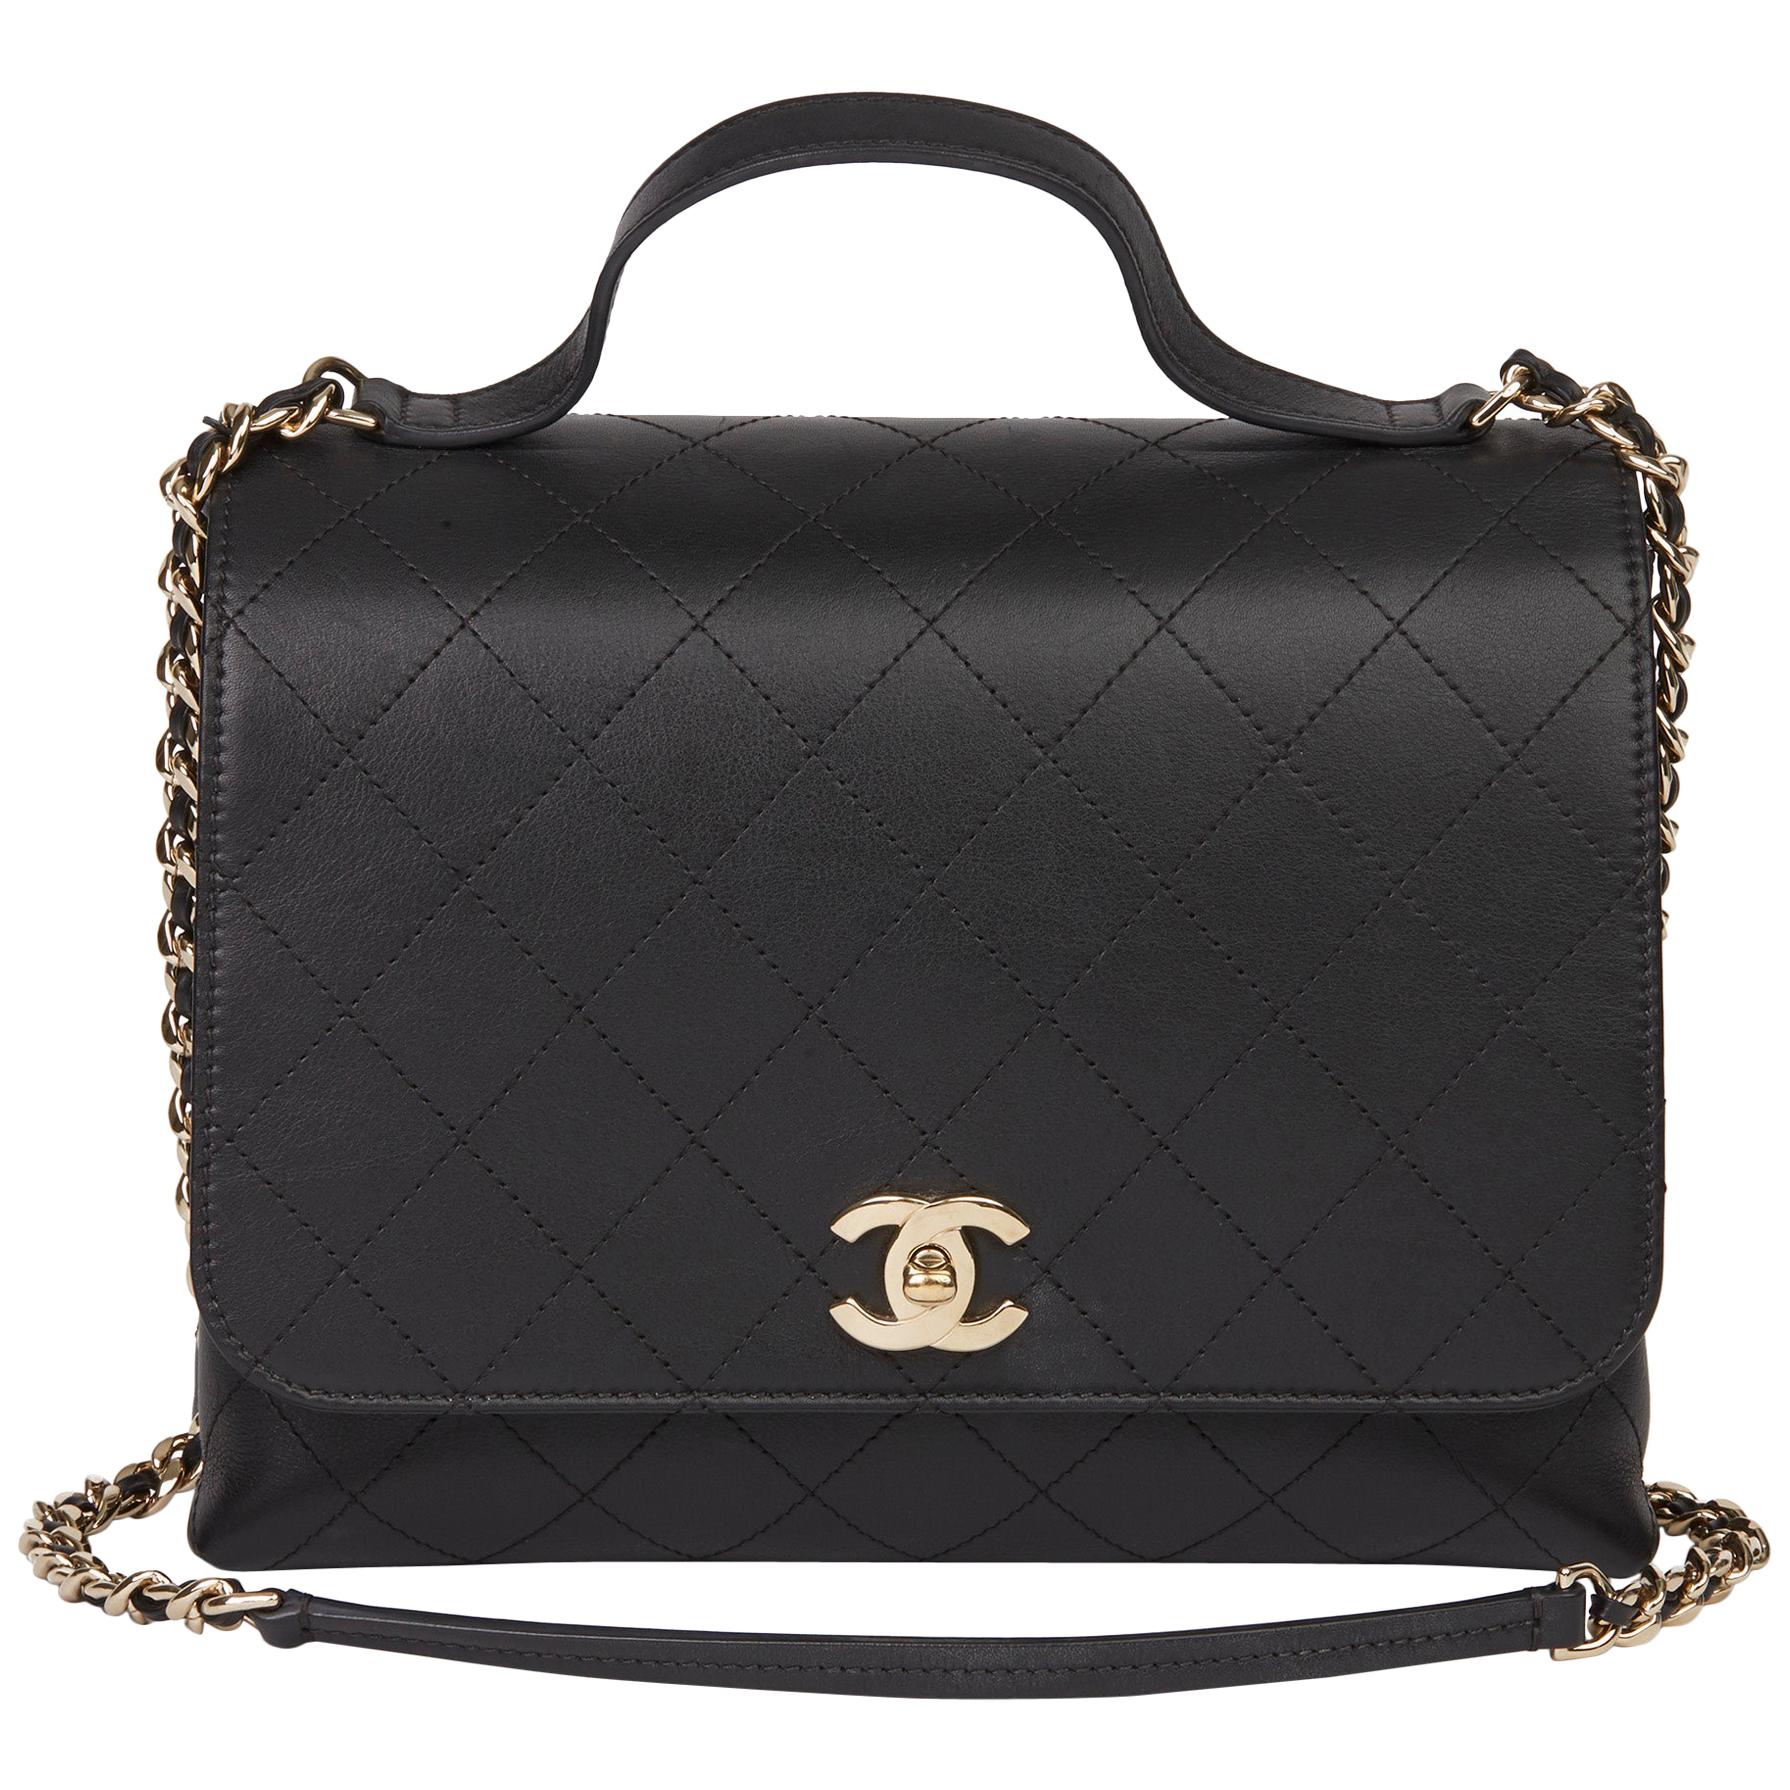 2019 Chanel Black Quilted Calfskin Leather Classic Top Handle Shoulder Bag